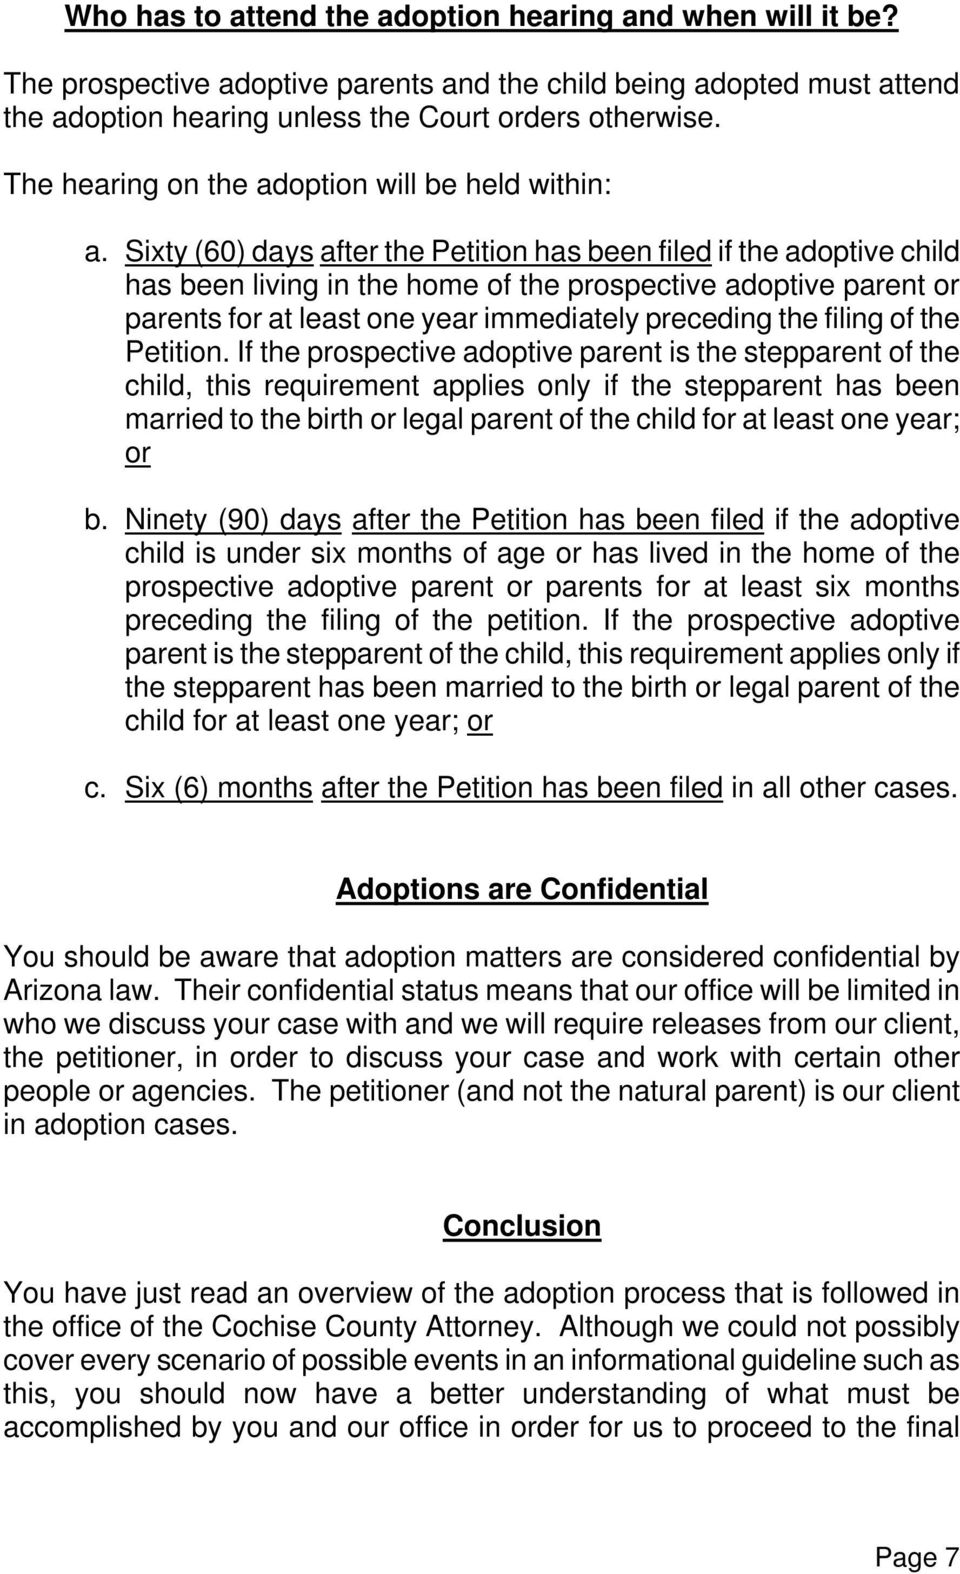 Sixty (60) days after the Petition has been filed if the adoptive child has been living in the home of the prospective adoptive parent or parents for at least one year immediately preceding the